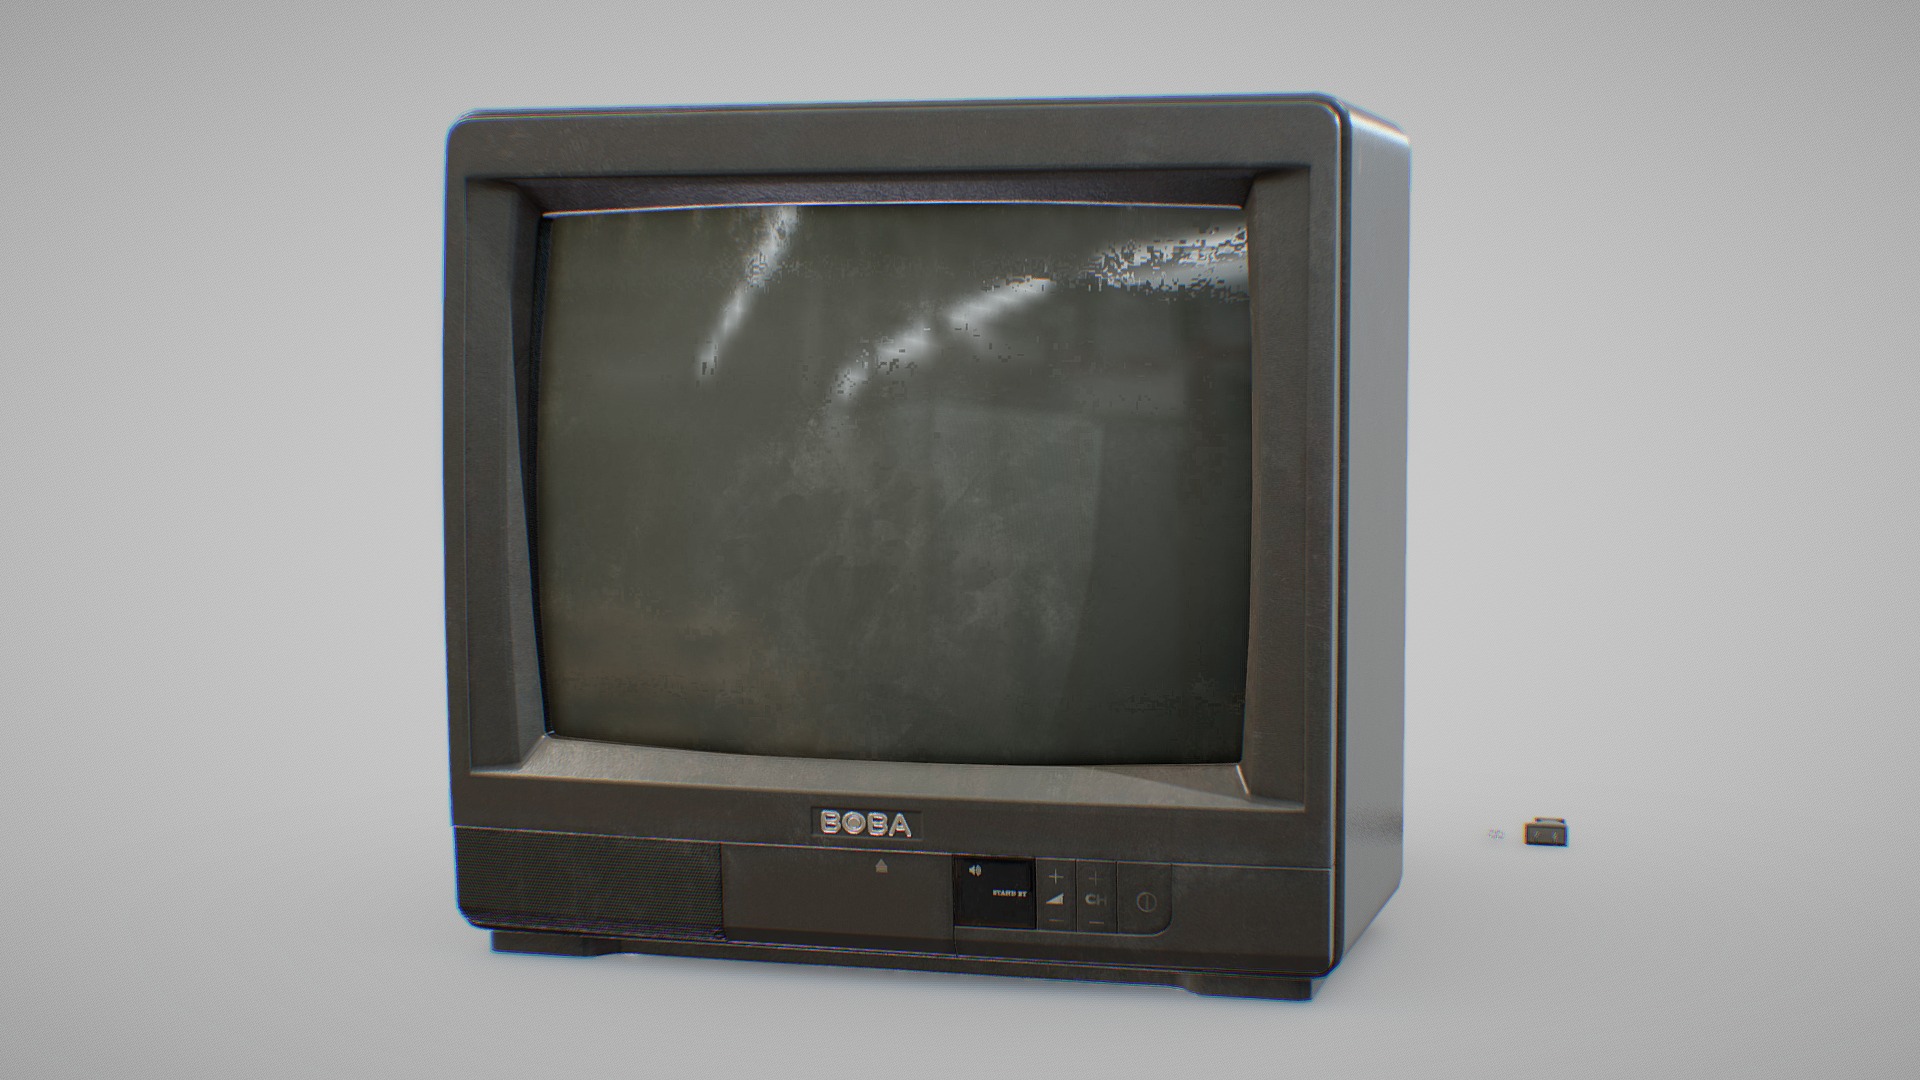 3D model 90s Tv - This is a 3D model of the 90s Tv. The 3D model is about a television on a wall.